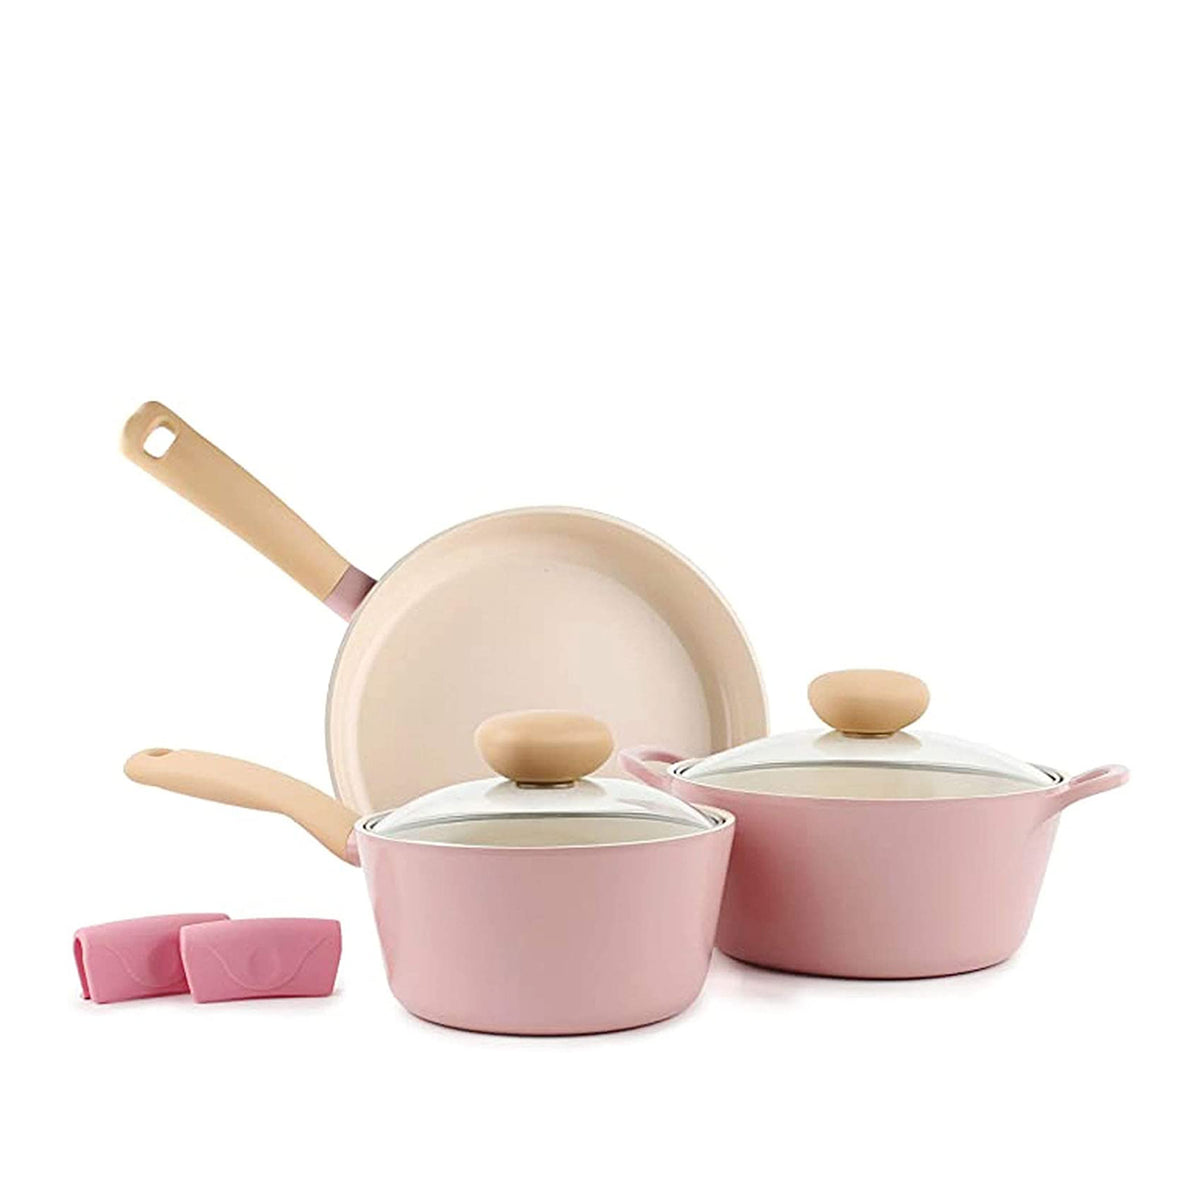 cookware in-the-pink  Cookware set, Pots and pans sets, Ceramic